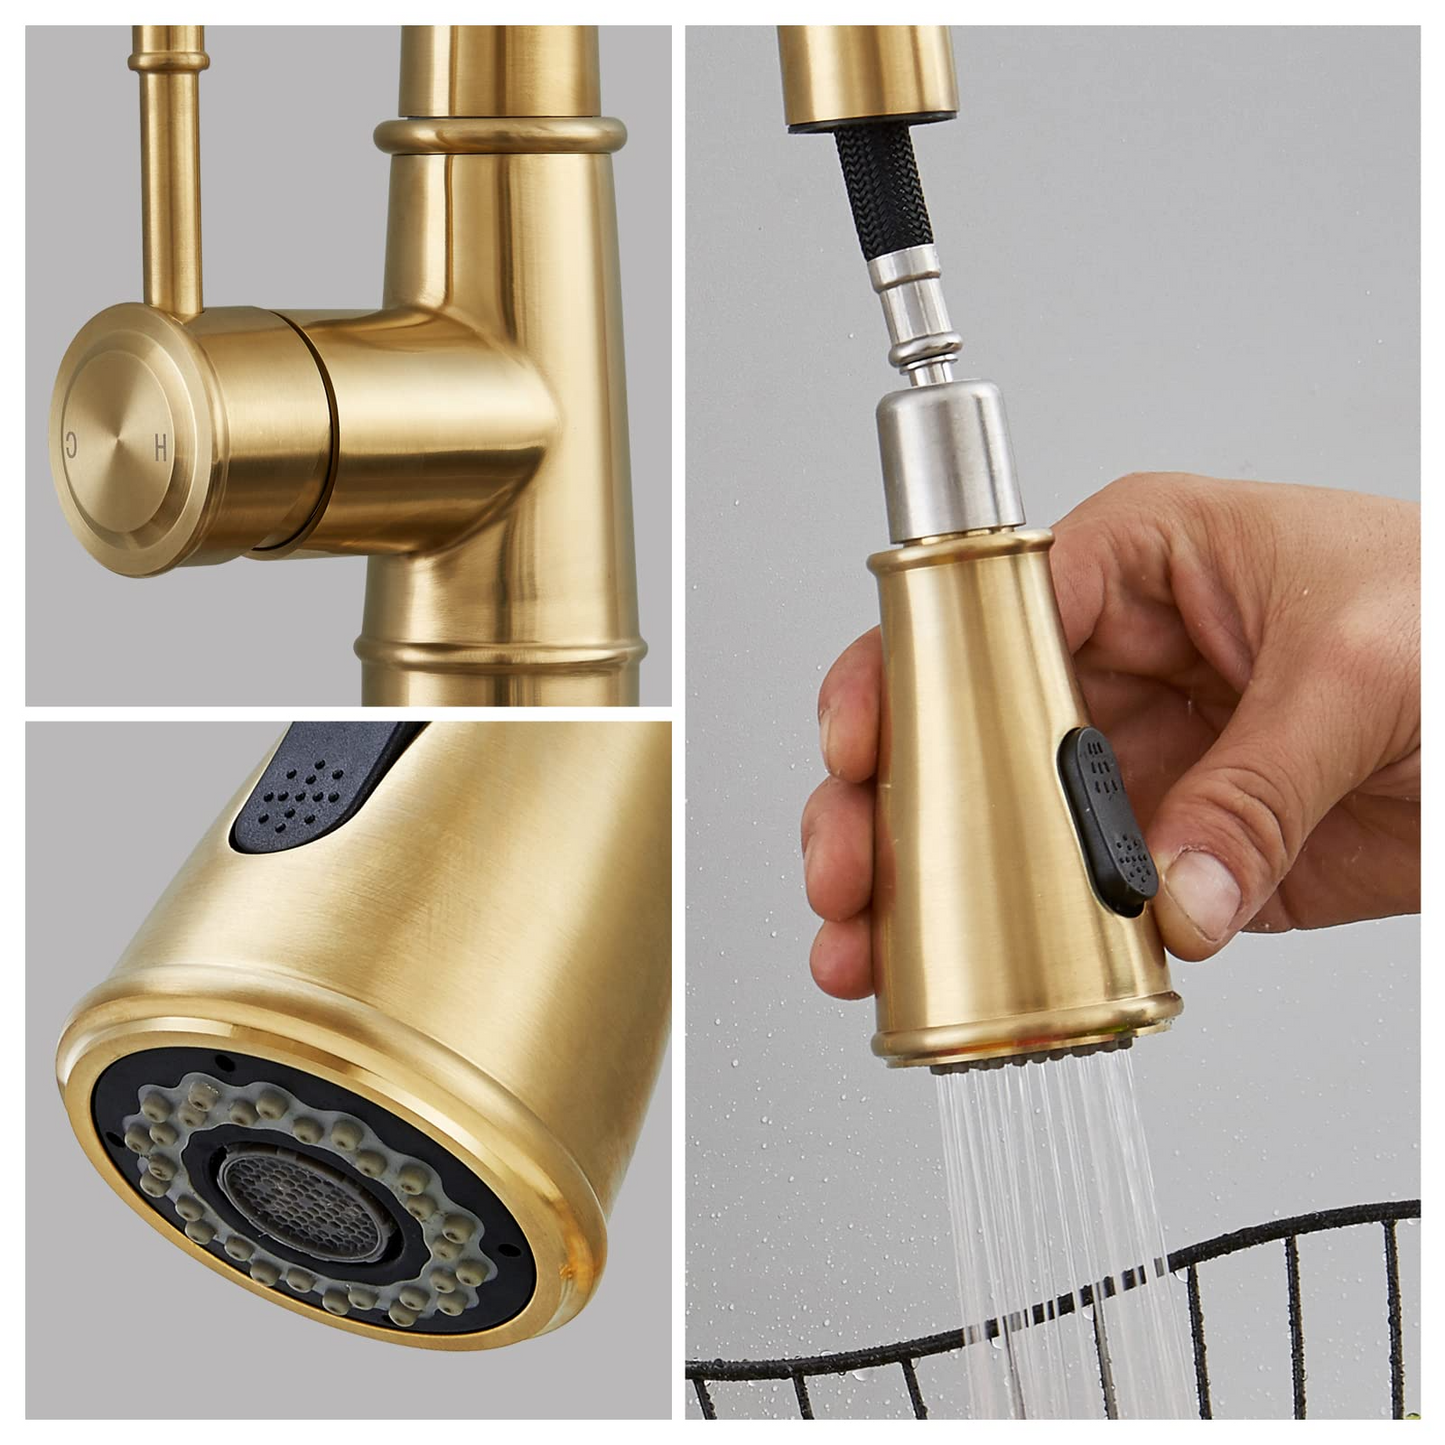 AvaMalis A|M Aquae Gold Kitchen Faucet with Pull Down Sprayer; Brushed Gold Kitchen Sink Faucets 1Handle Single Hole Deck Mount High Arc 360 Degree Swivel Pull Out Kitchen Faucets